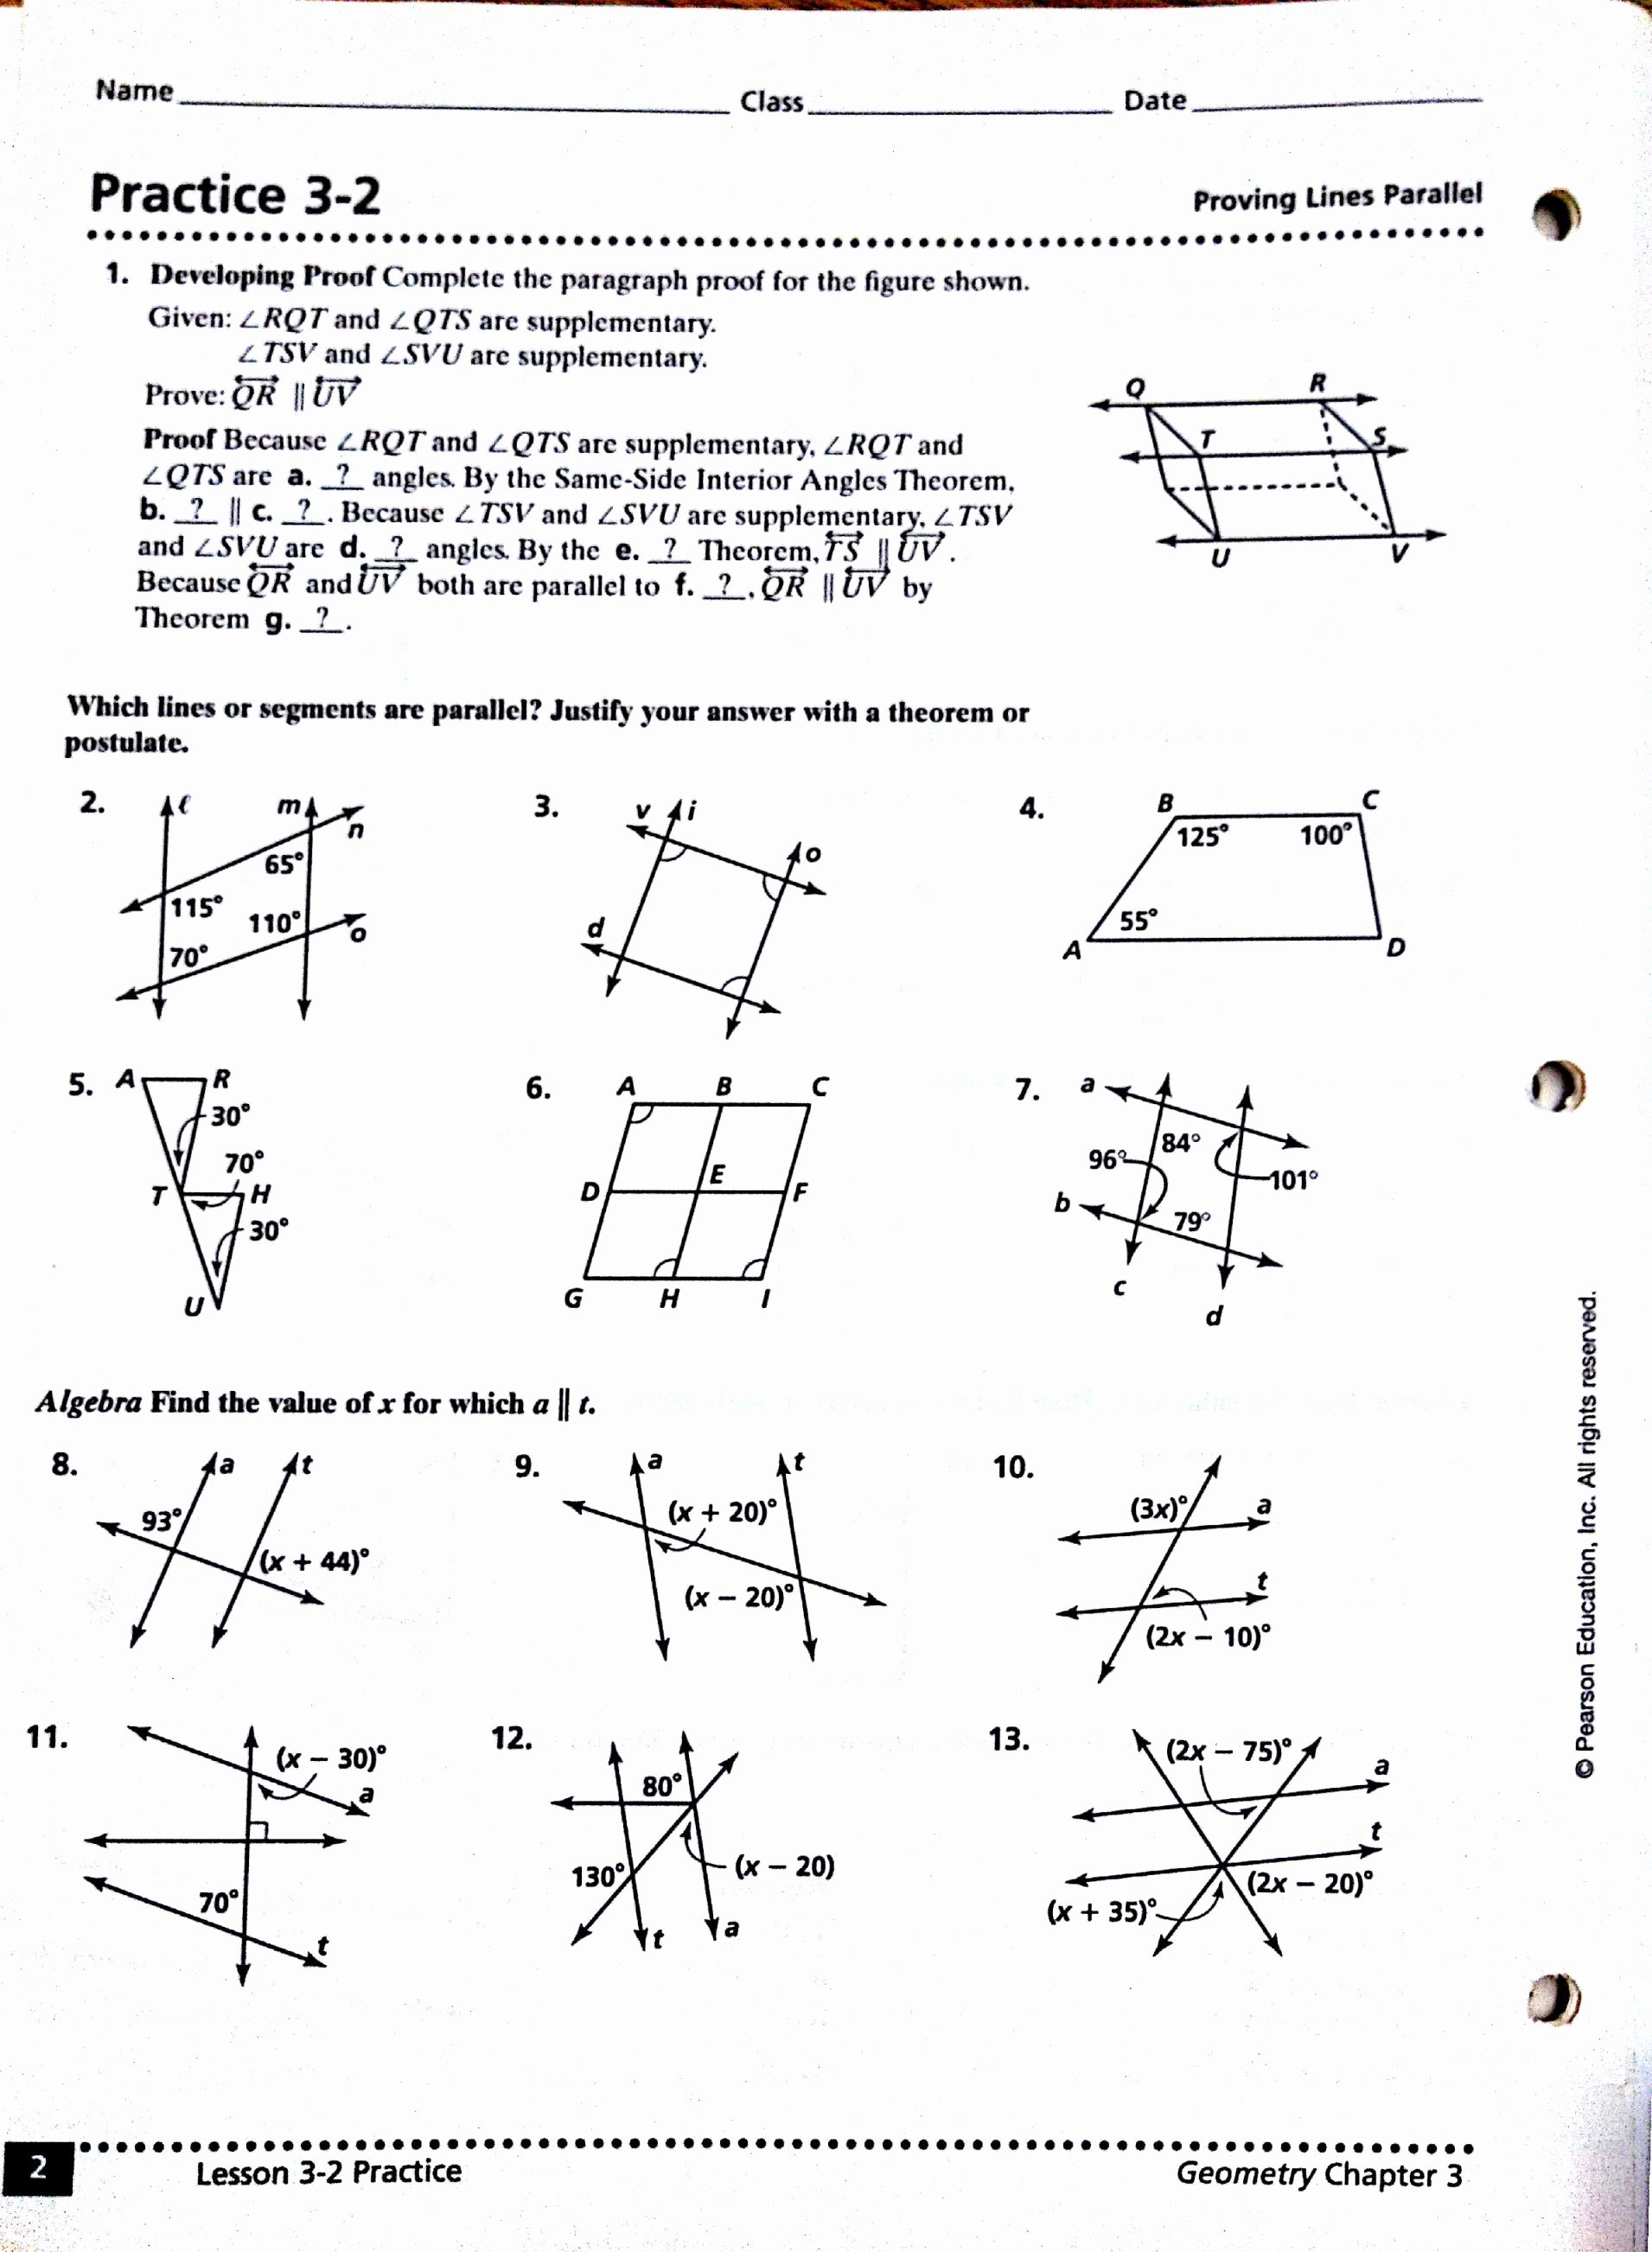 Algebraic Proofs Worksheet with Answers Awesome Algebraic Proofs Worksheet with Answers